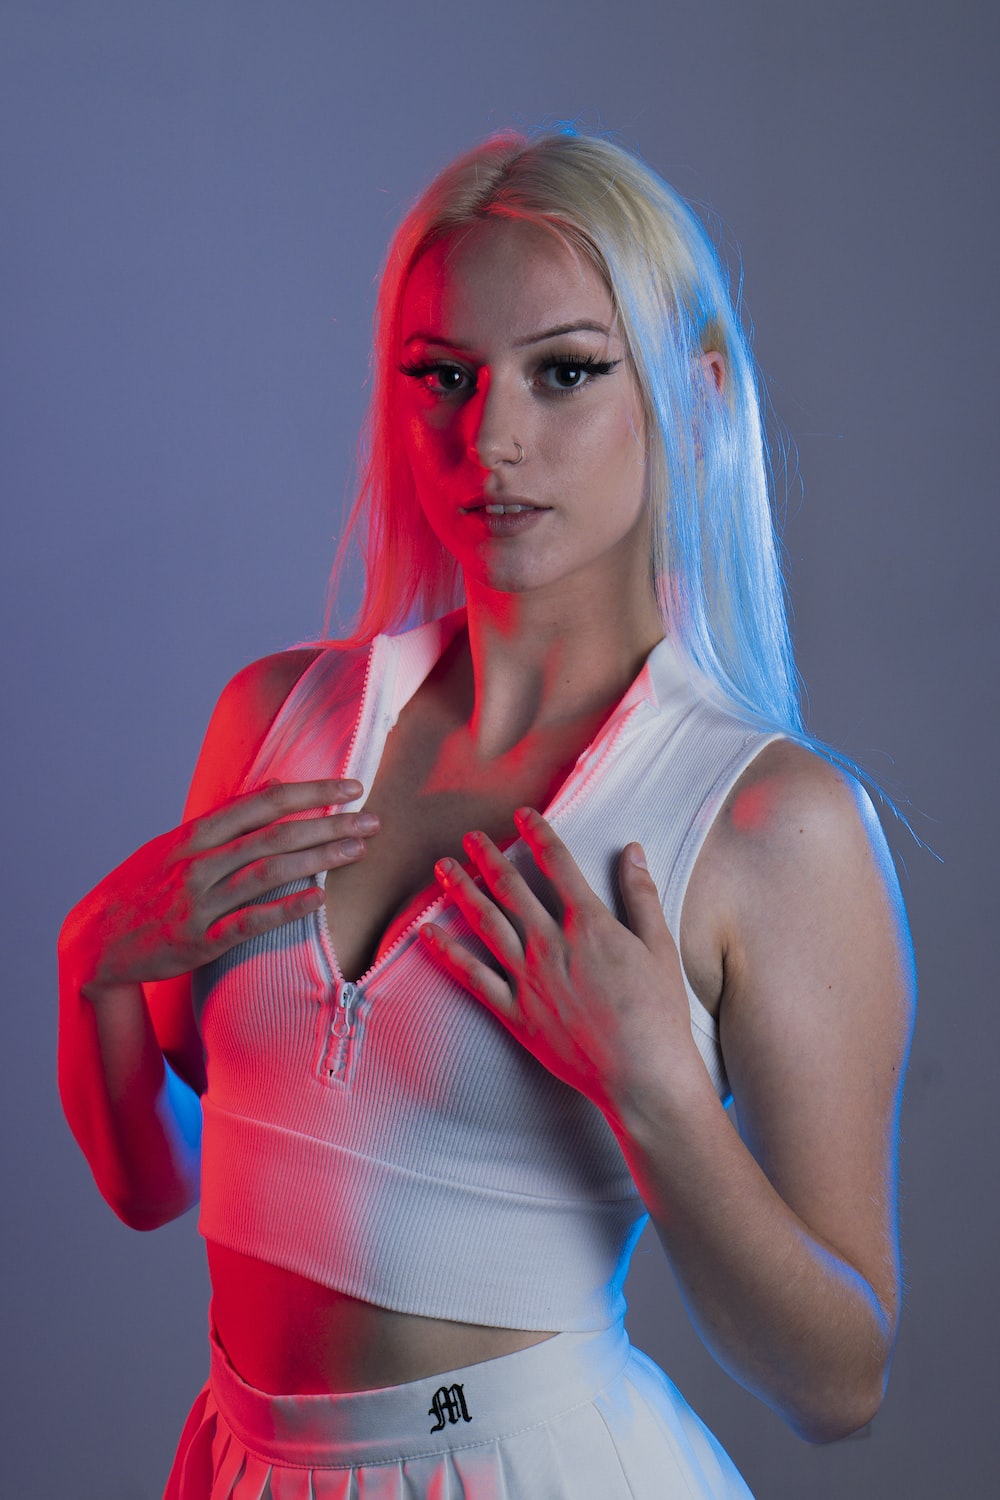 a woman with white hair and blue hair wearing a white top